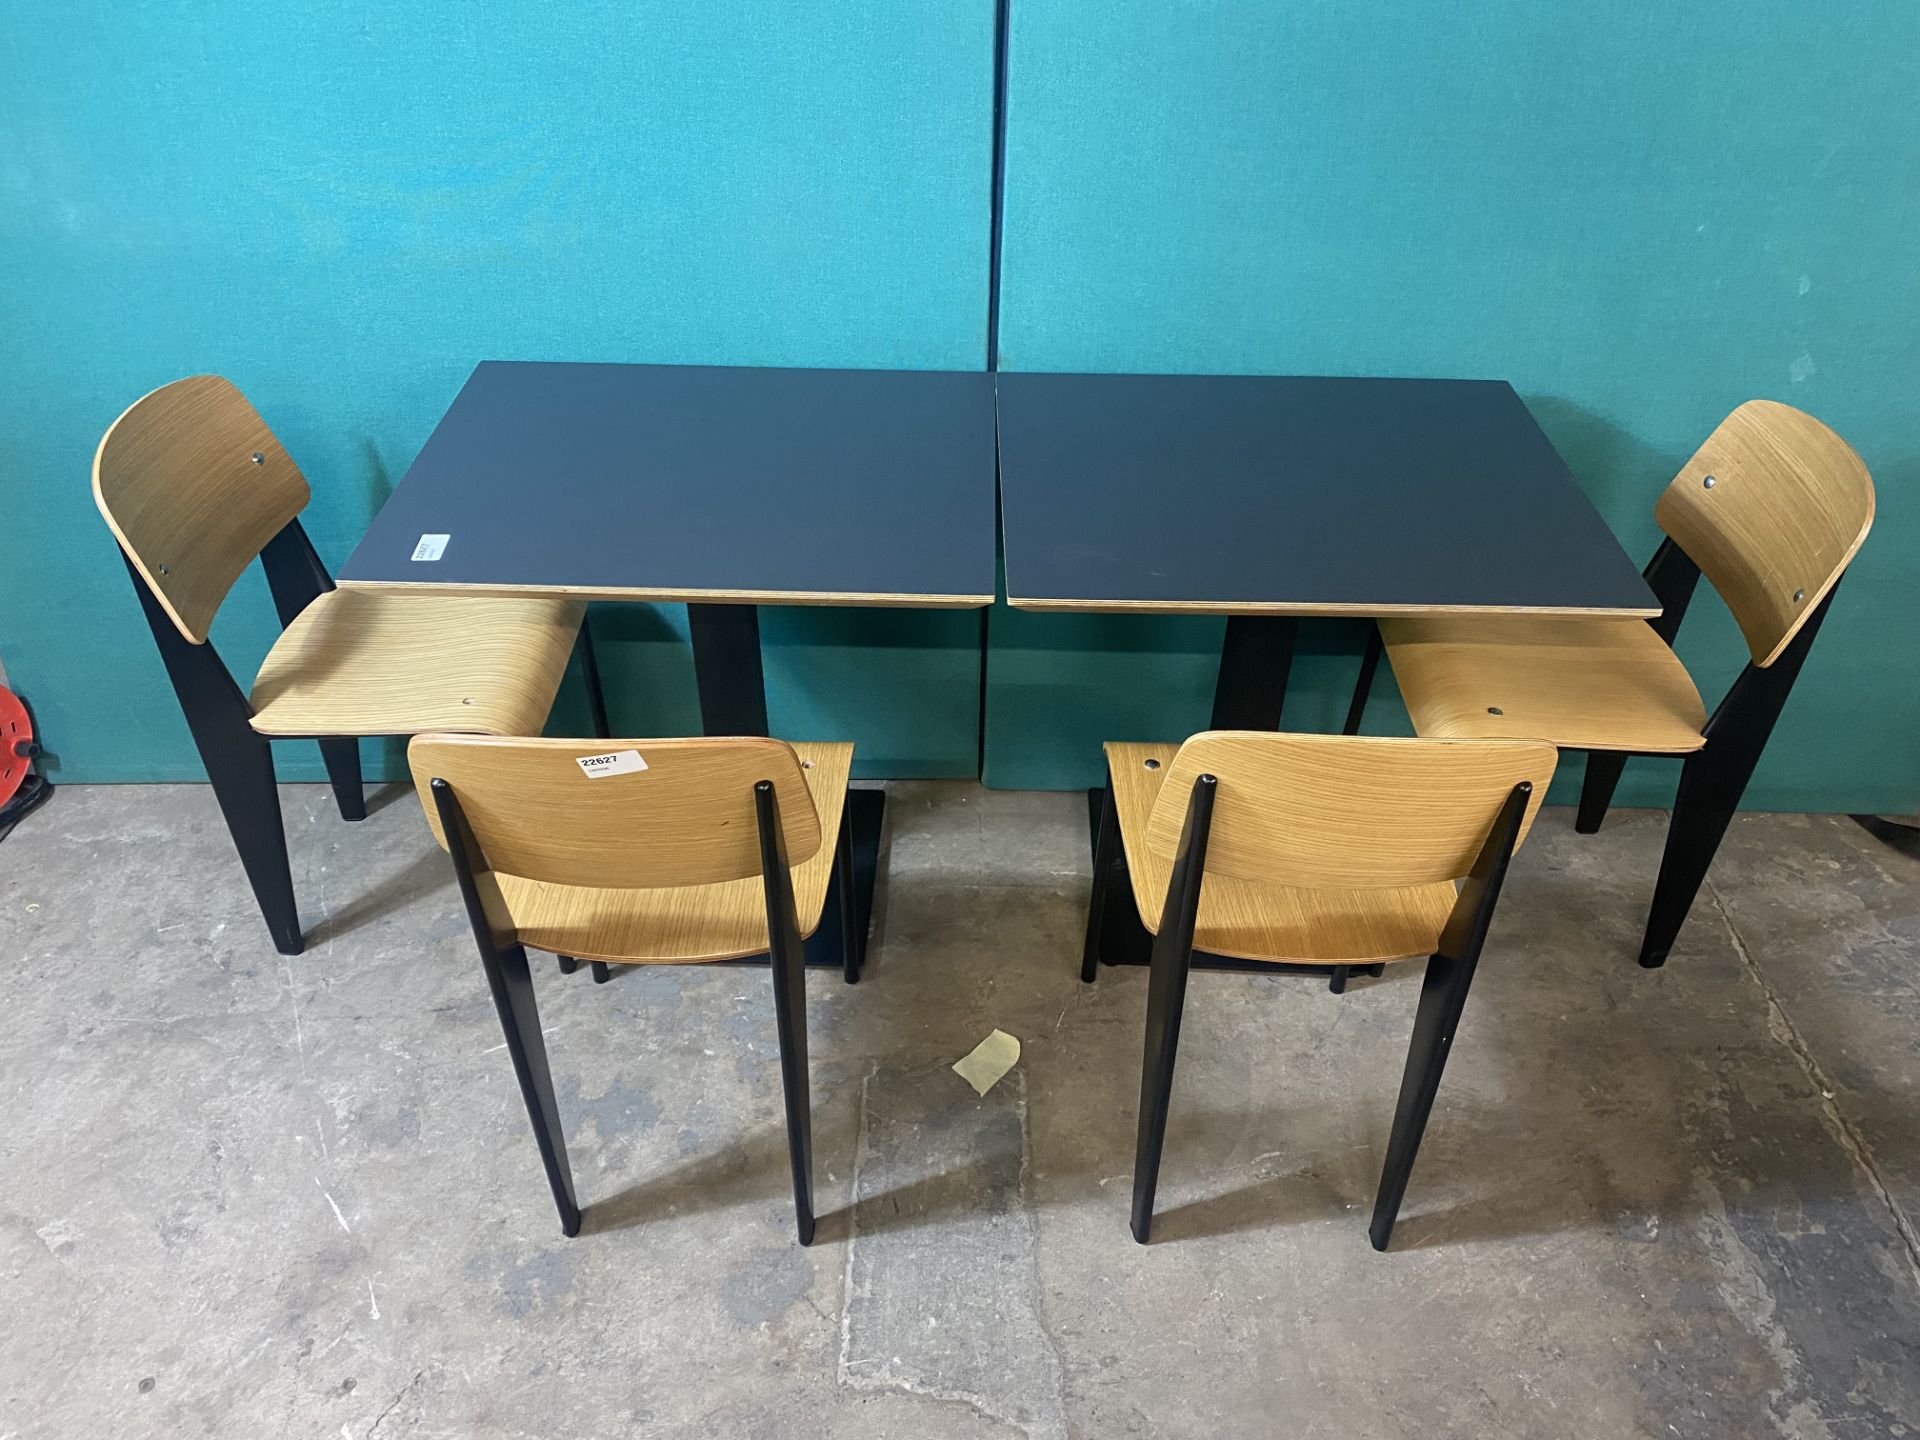 Pair Of Black Bistro Tables & Chairs Sets - See Description & Photos